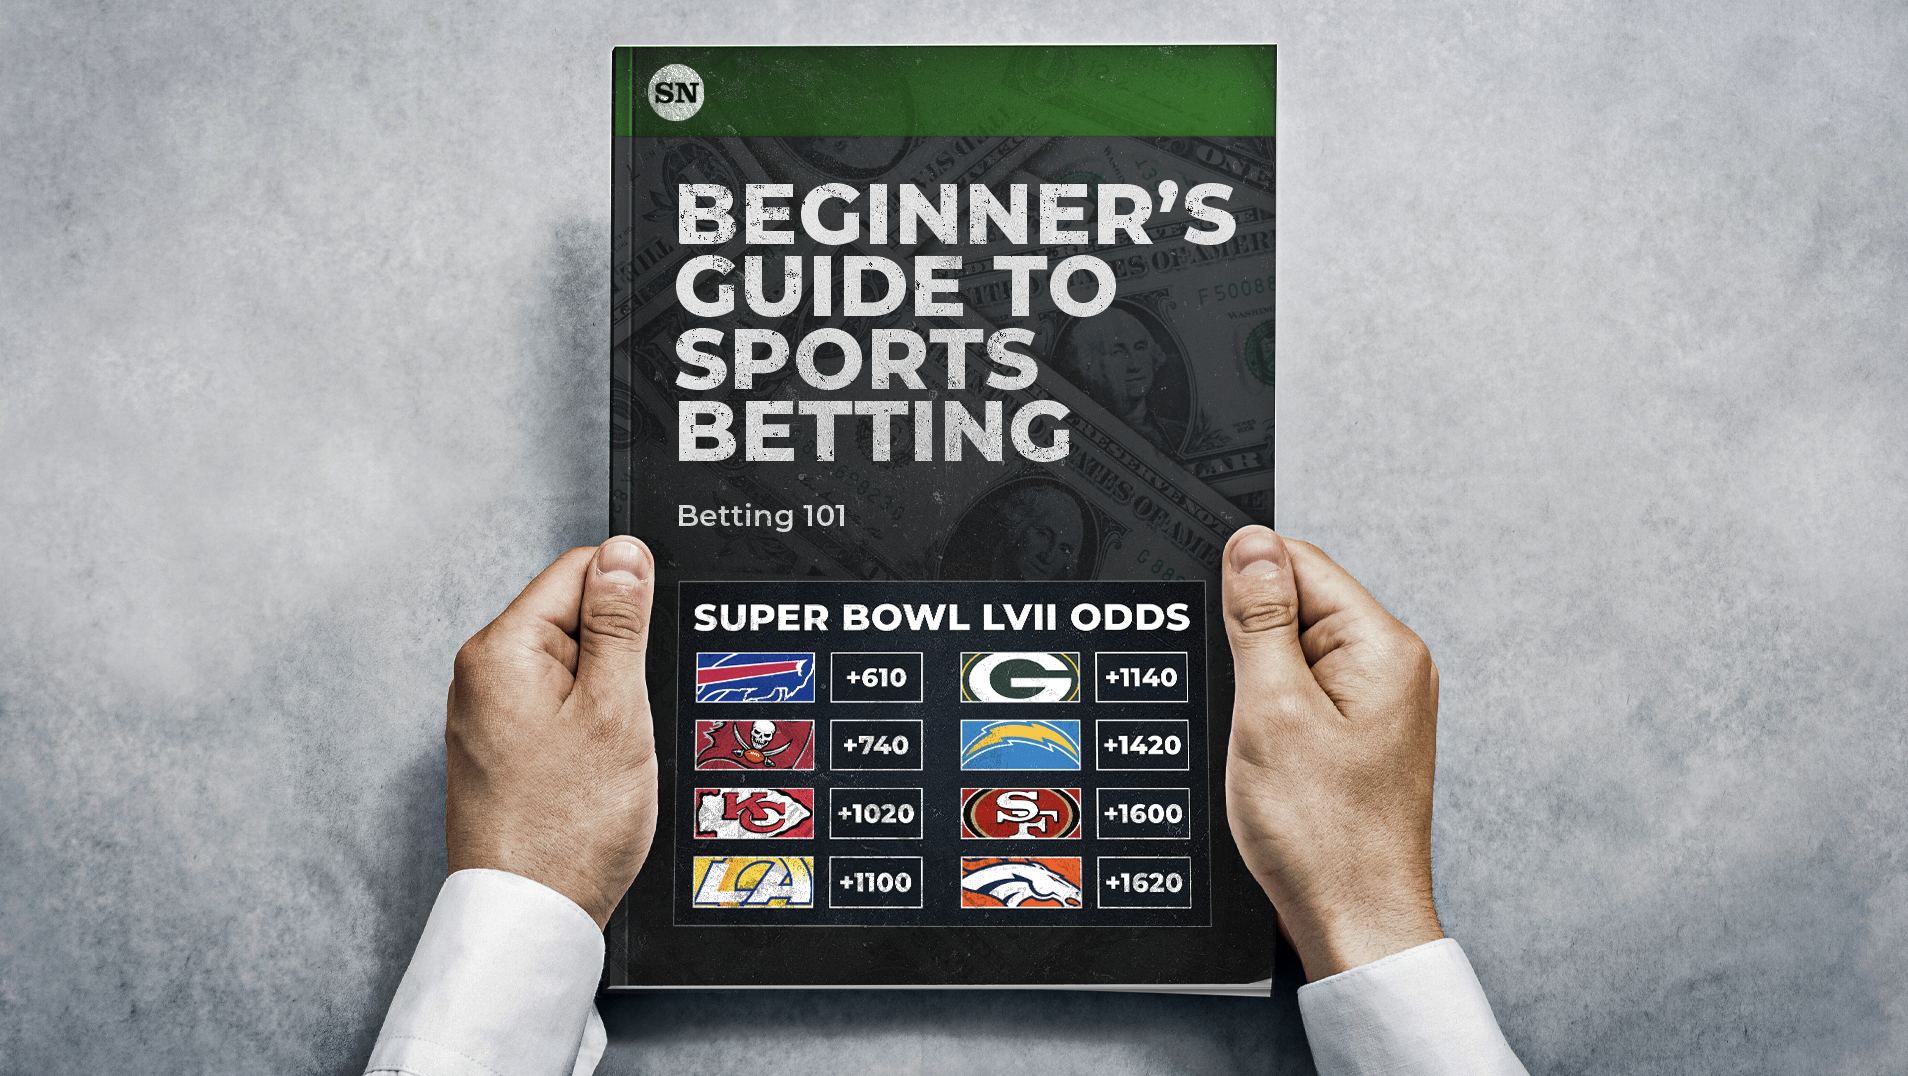 eginner's Guide to Betting: Getting Started